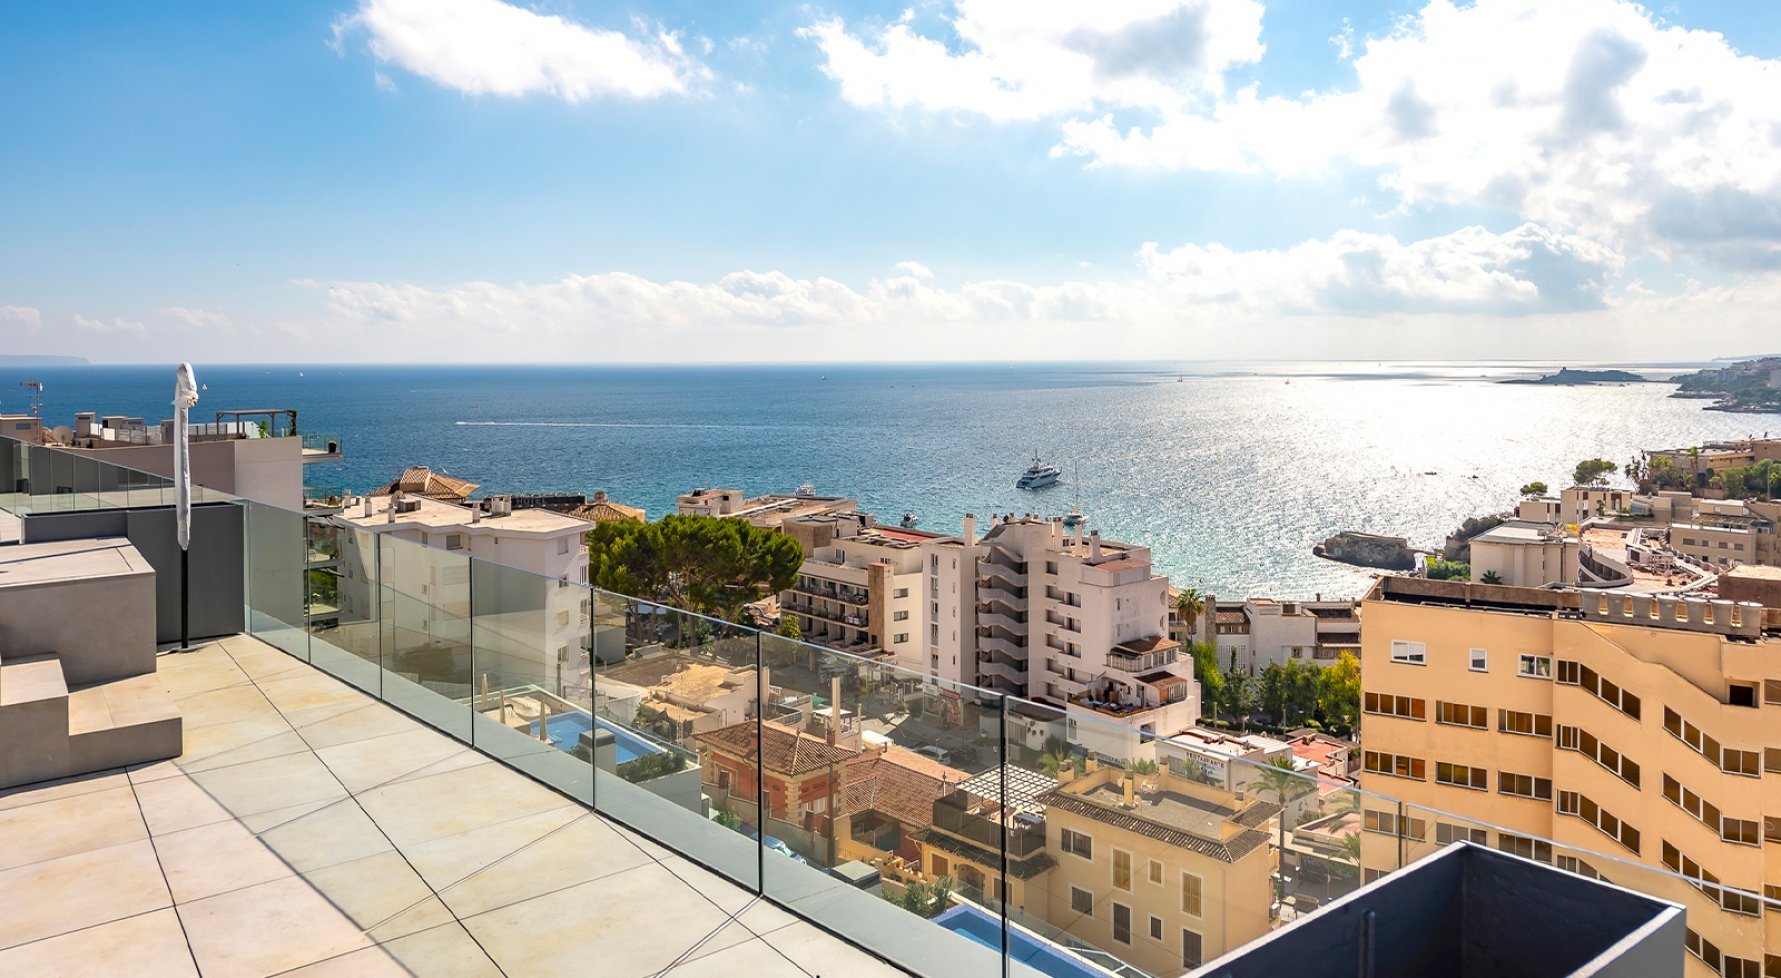 Property in 07015 Mallorca - Cala Major: Spectacular penthouse with large roof terrace, sea views and private pool - picture 1